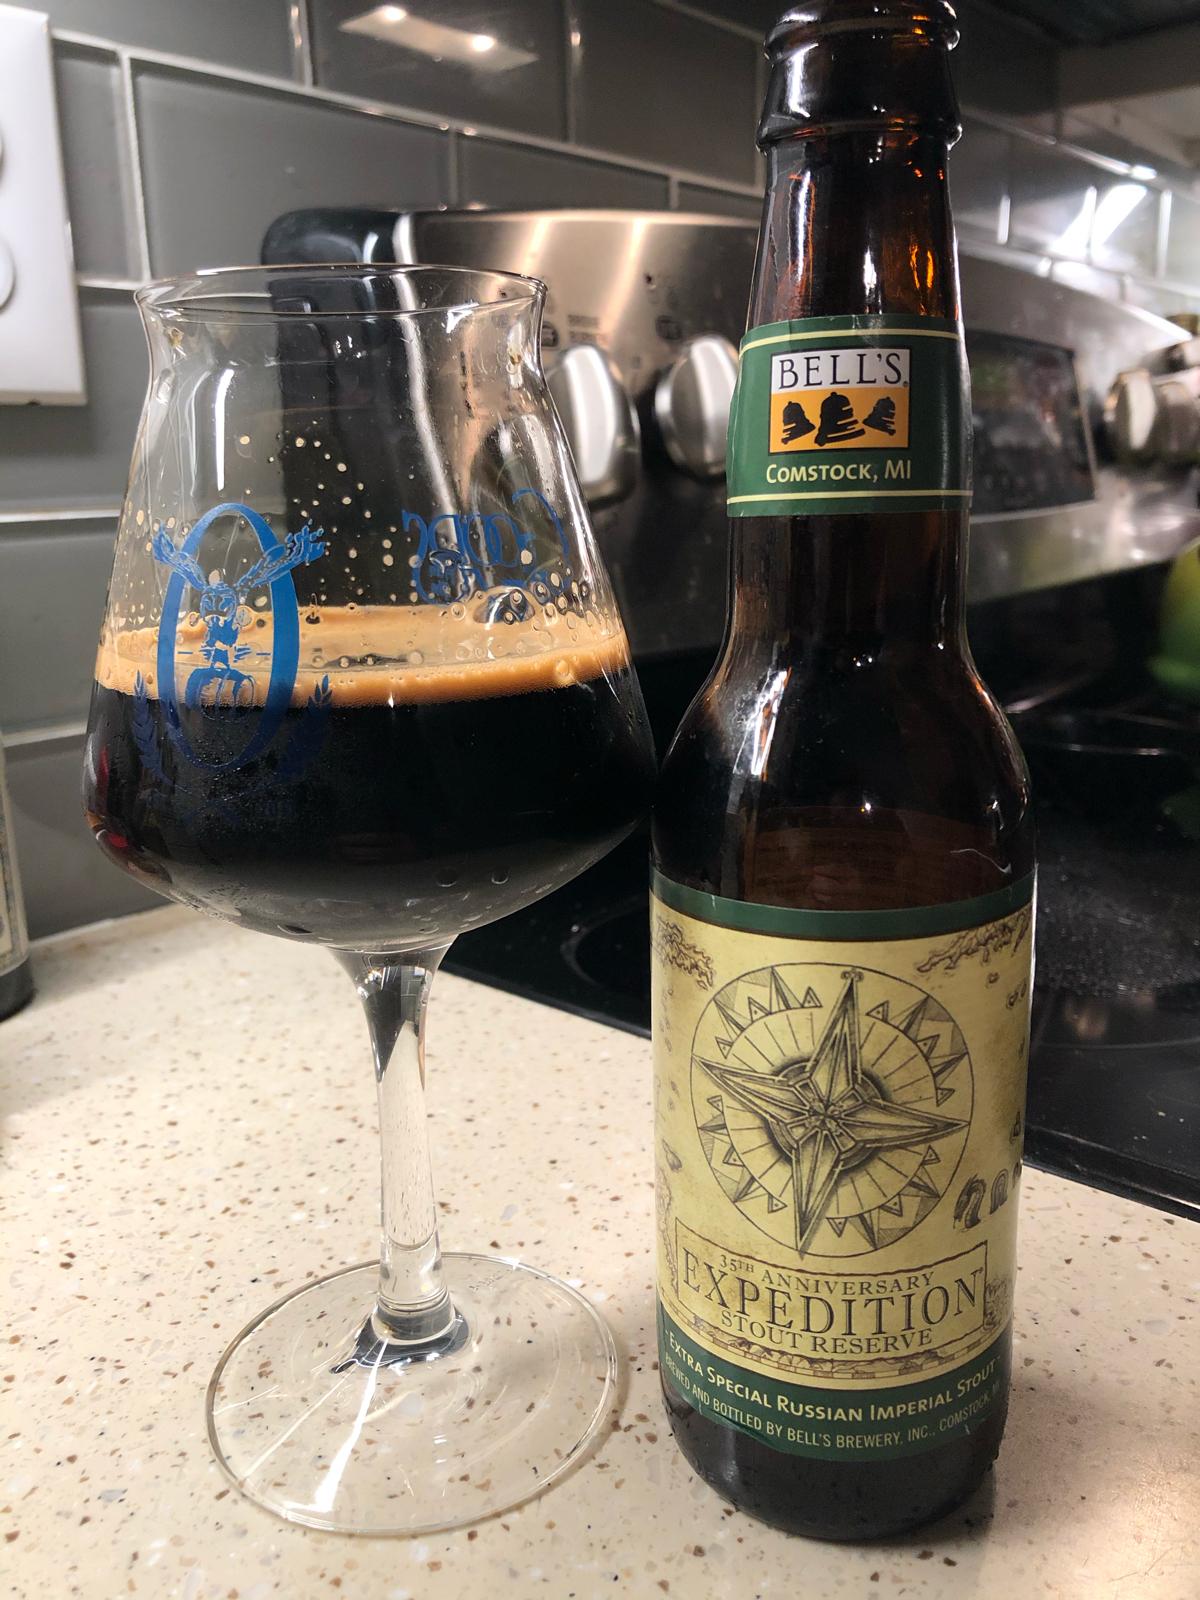 35th Anniversary Expedition Stout Reserve